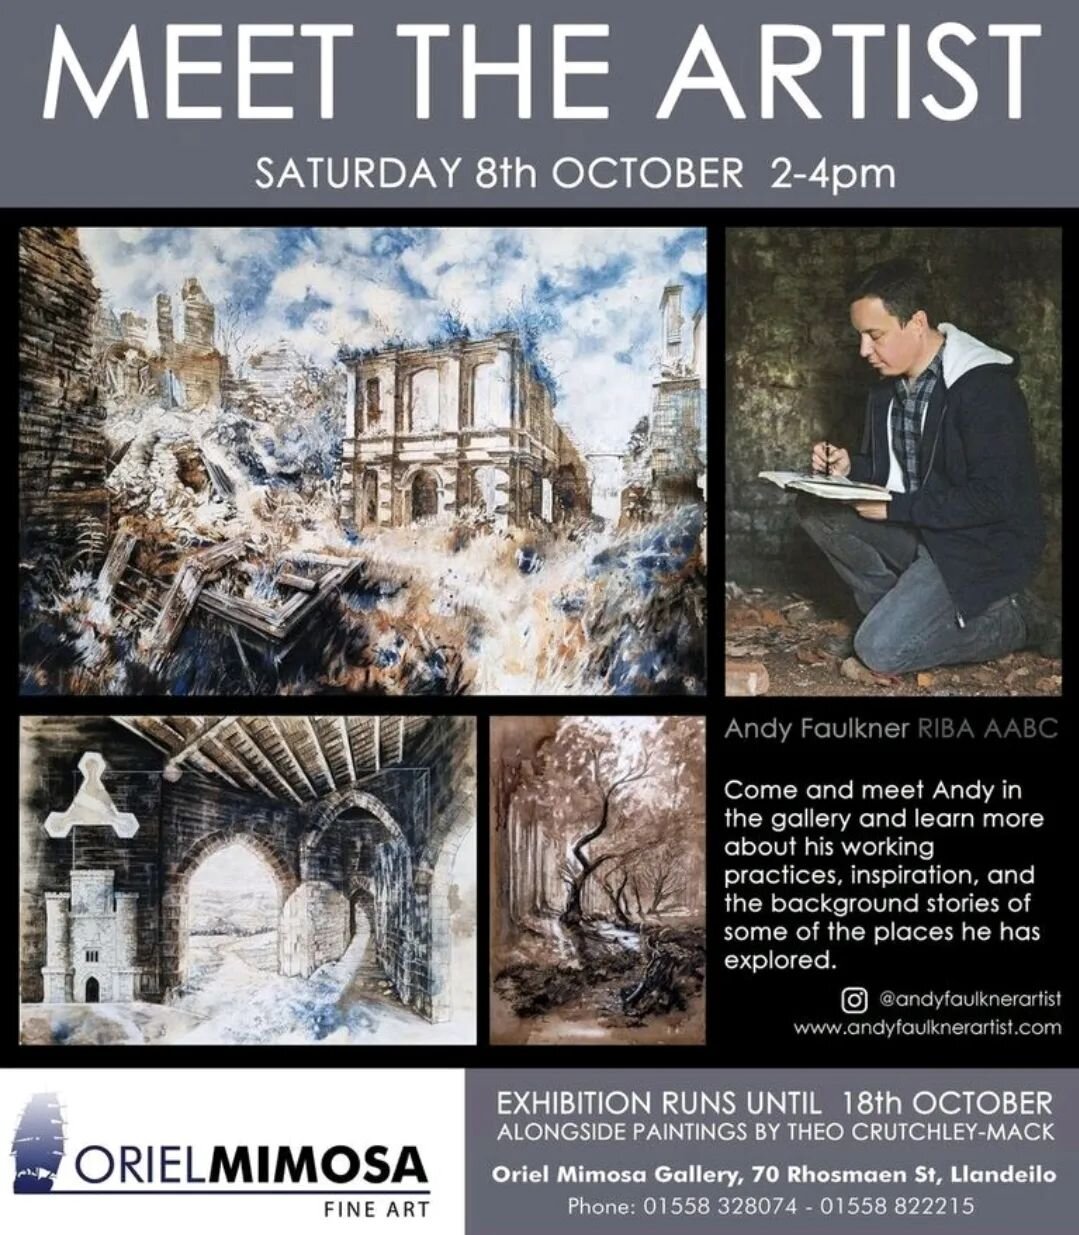 Come and see me at Oriel Mimosa on Saturday 8th!

I'm showing a broad range of work, including one huge painting ('Forgotten Stream').

I'll be there between 2 and 4pm (and other times by appointment....) to discuss the work, my working techniques an